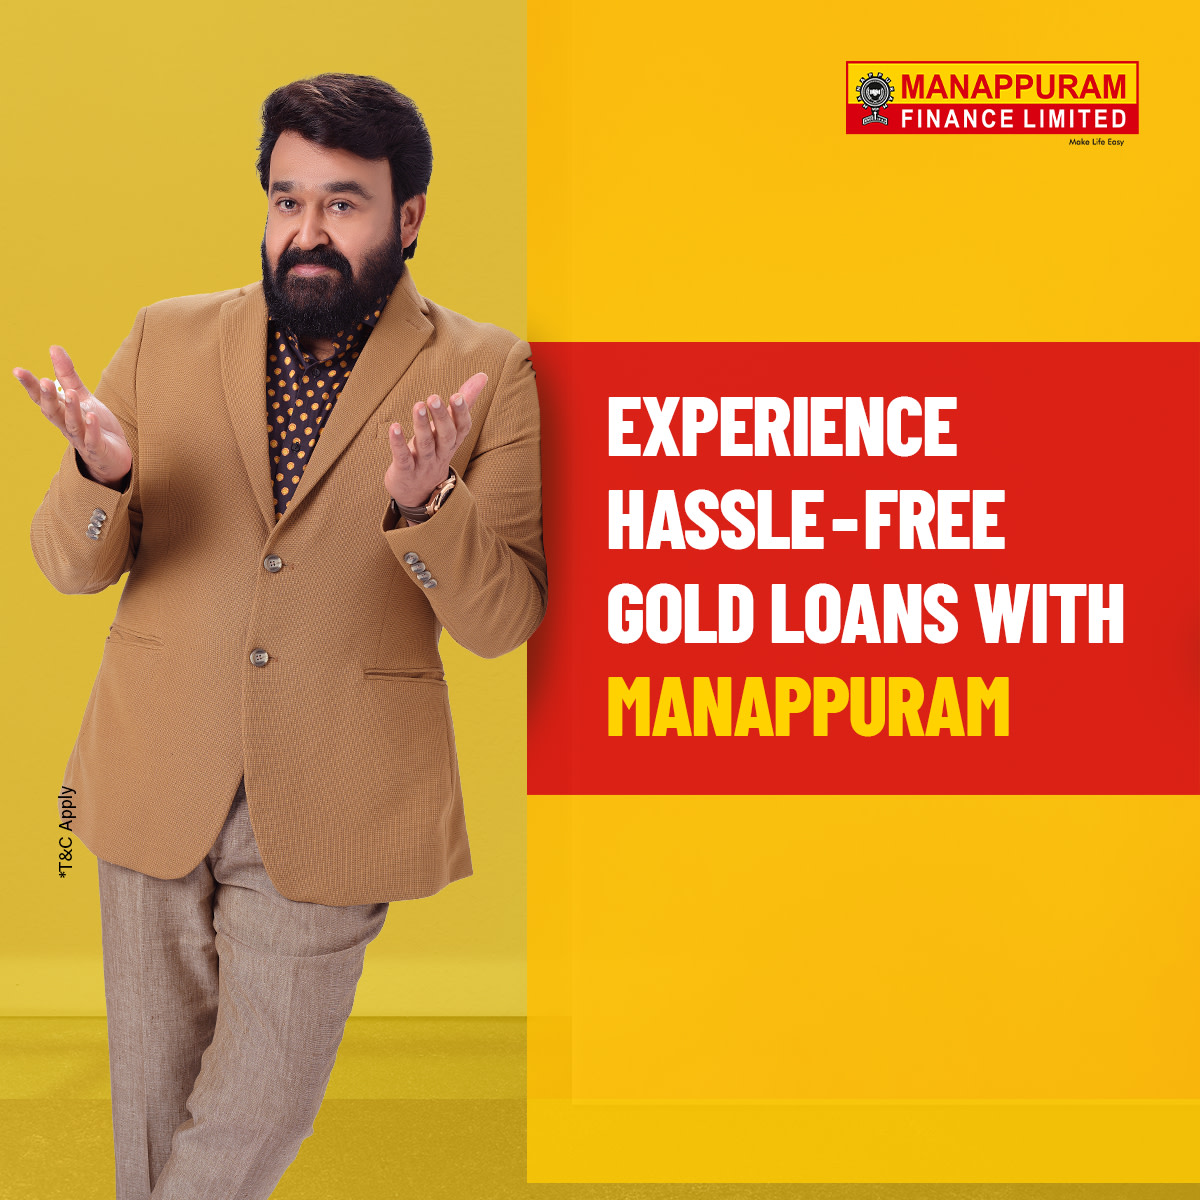 Manappuram Gold Loan is your opportunity to fulfill your wishes in the minimum time period. Hurry up!

Apply here: bit.ly/3C27Txh

*T & C Apply

#ManappuramFinance #instantgoldloan #gold #goldrate #goldupdates #personalloan #finance #loan #businessloan #mortgageloan